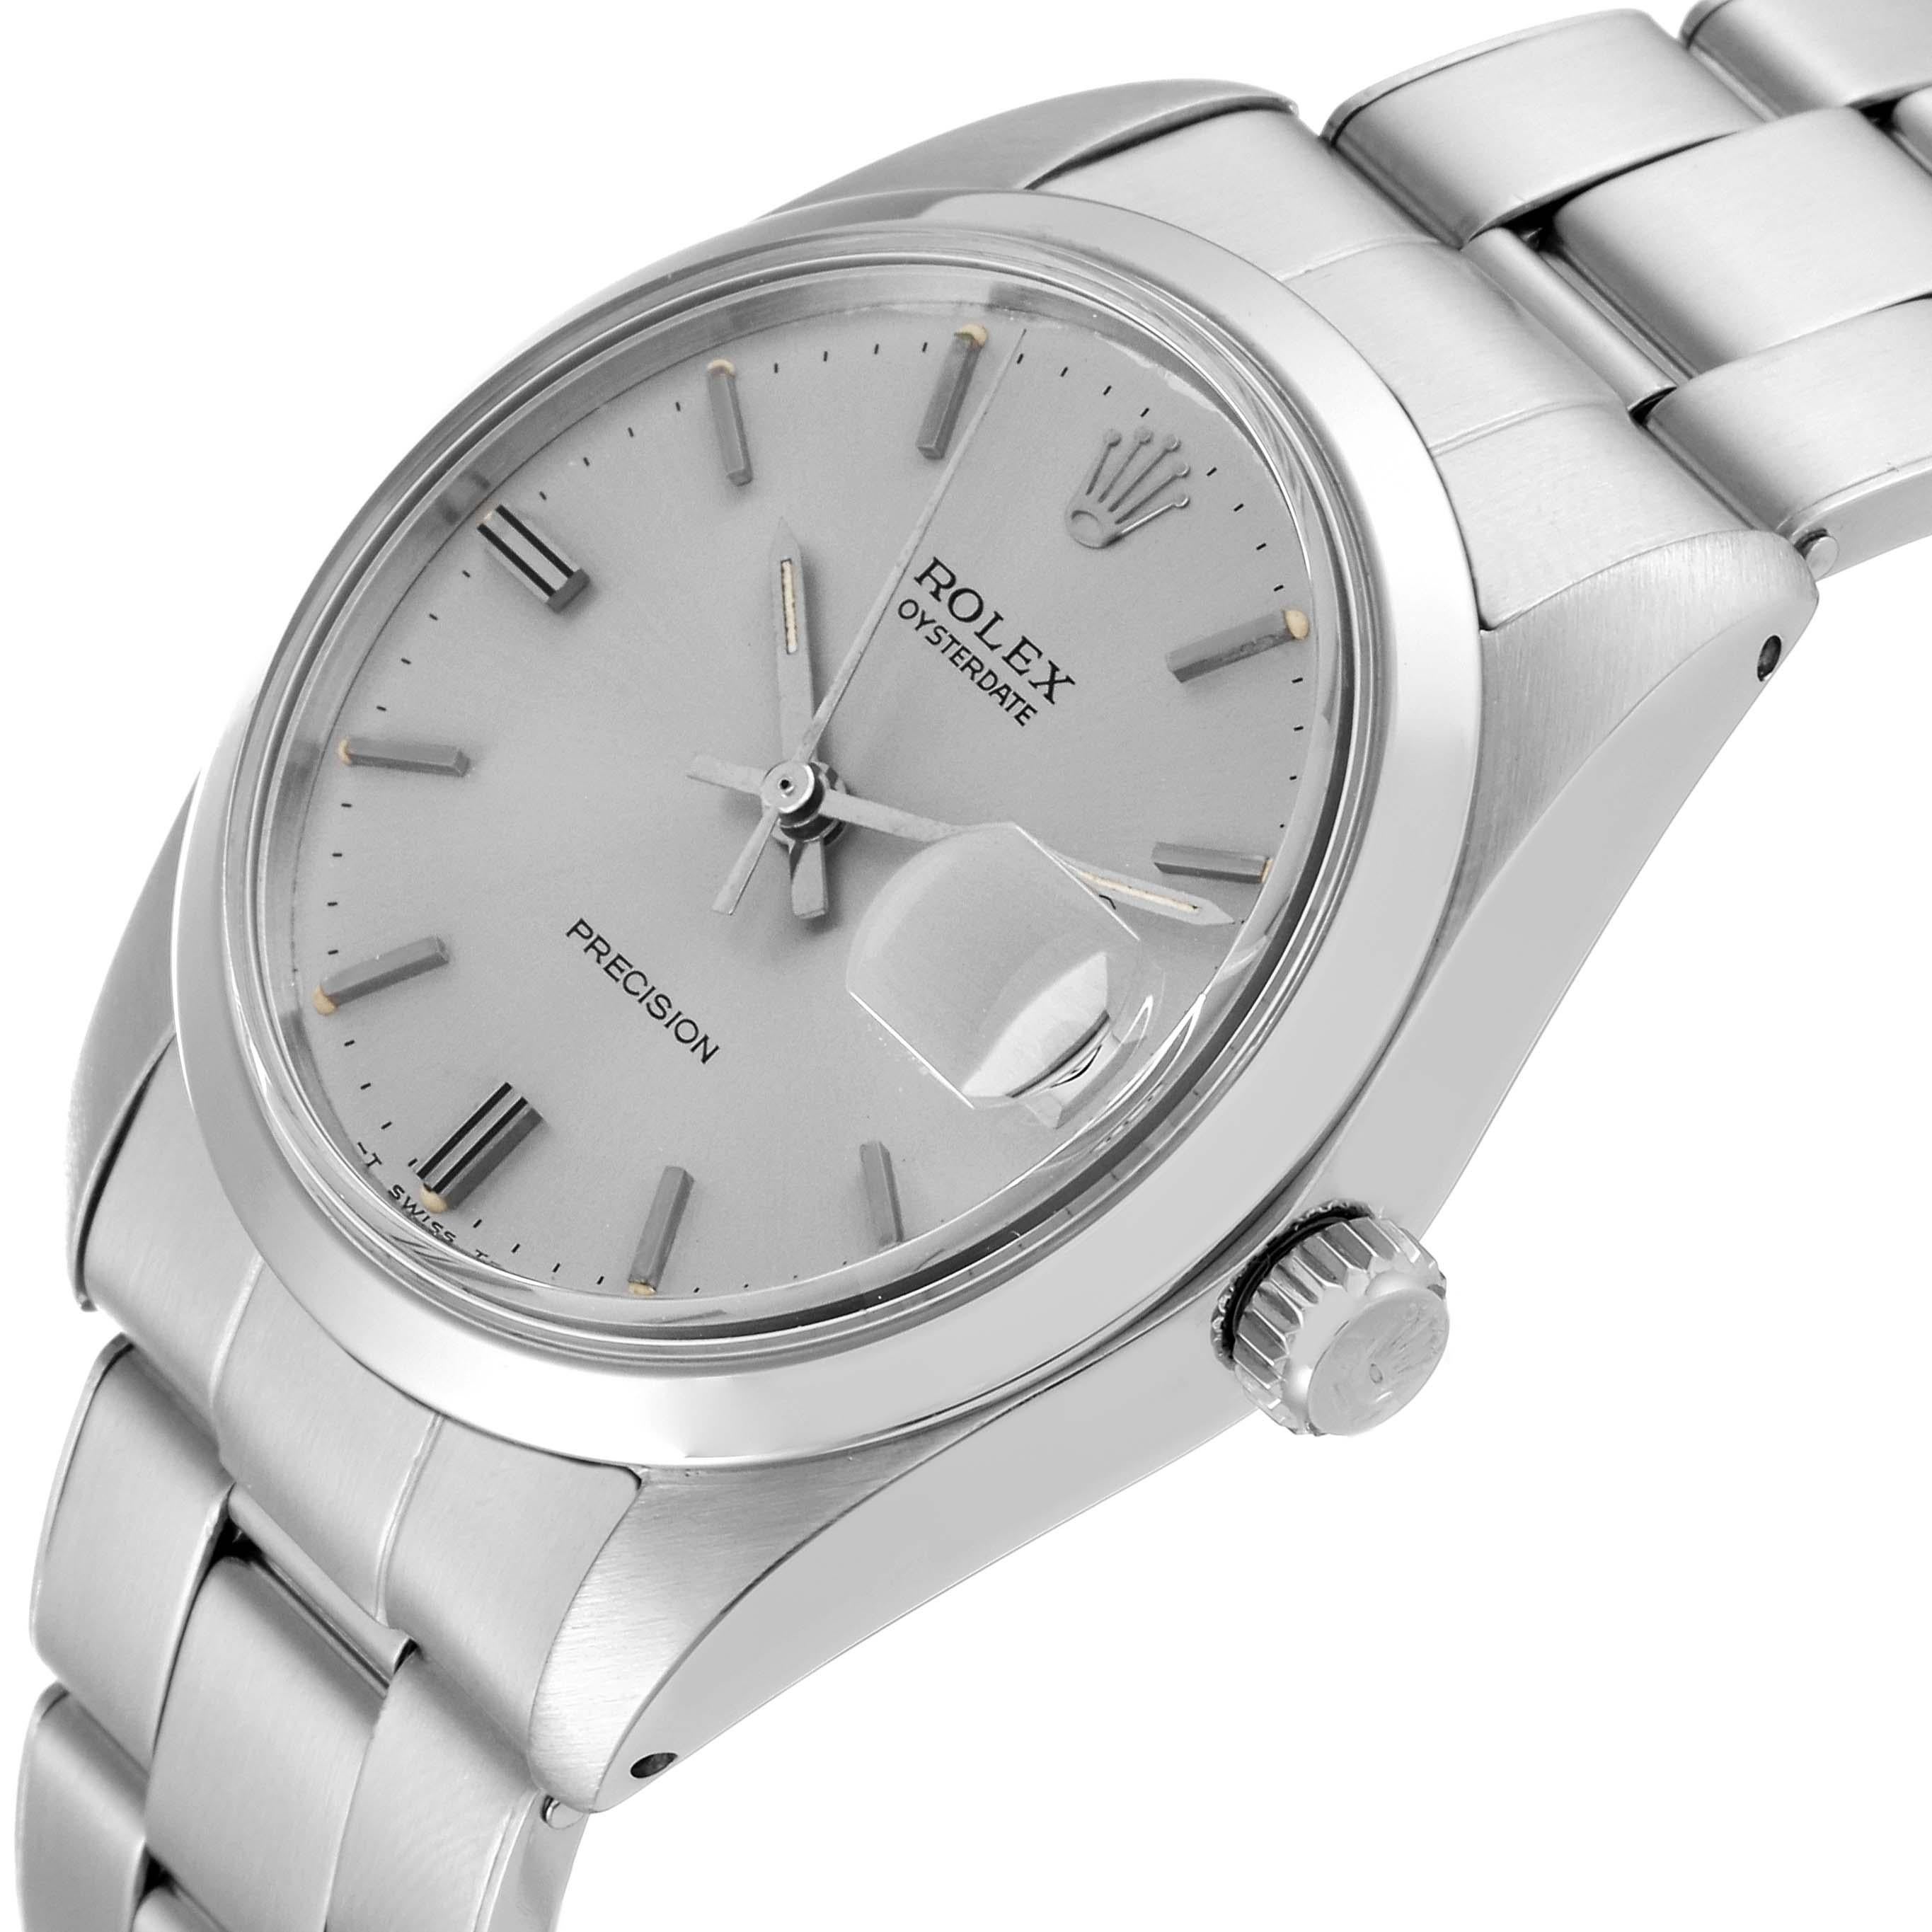 Rolex OysterDate Precision Silver Dial Vintage Steel Mens Watch 6694. Manual-winding movement. Stainless steel oyster case 35.0 mm in diameter. Rolex logo on the crown. Stainless steel smooth bezel. Acrylic crystal with cyclops magnifier. Silver